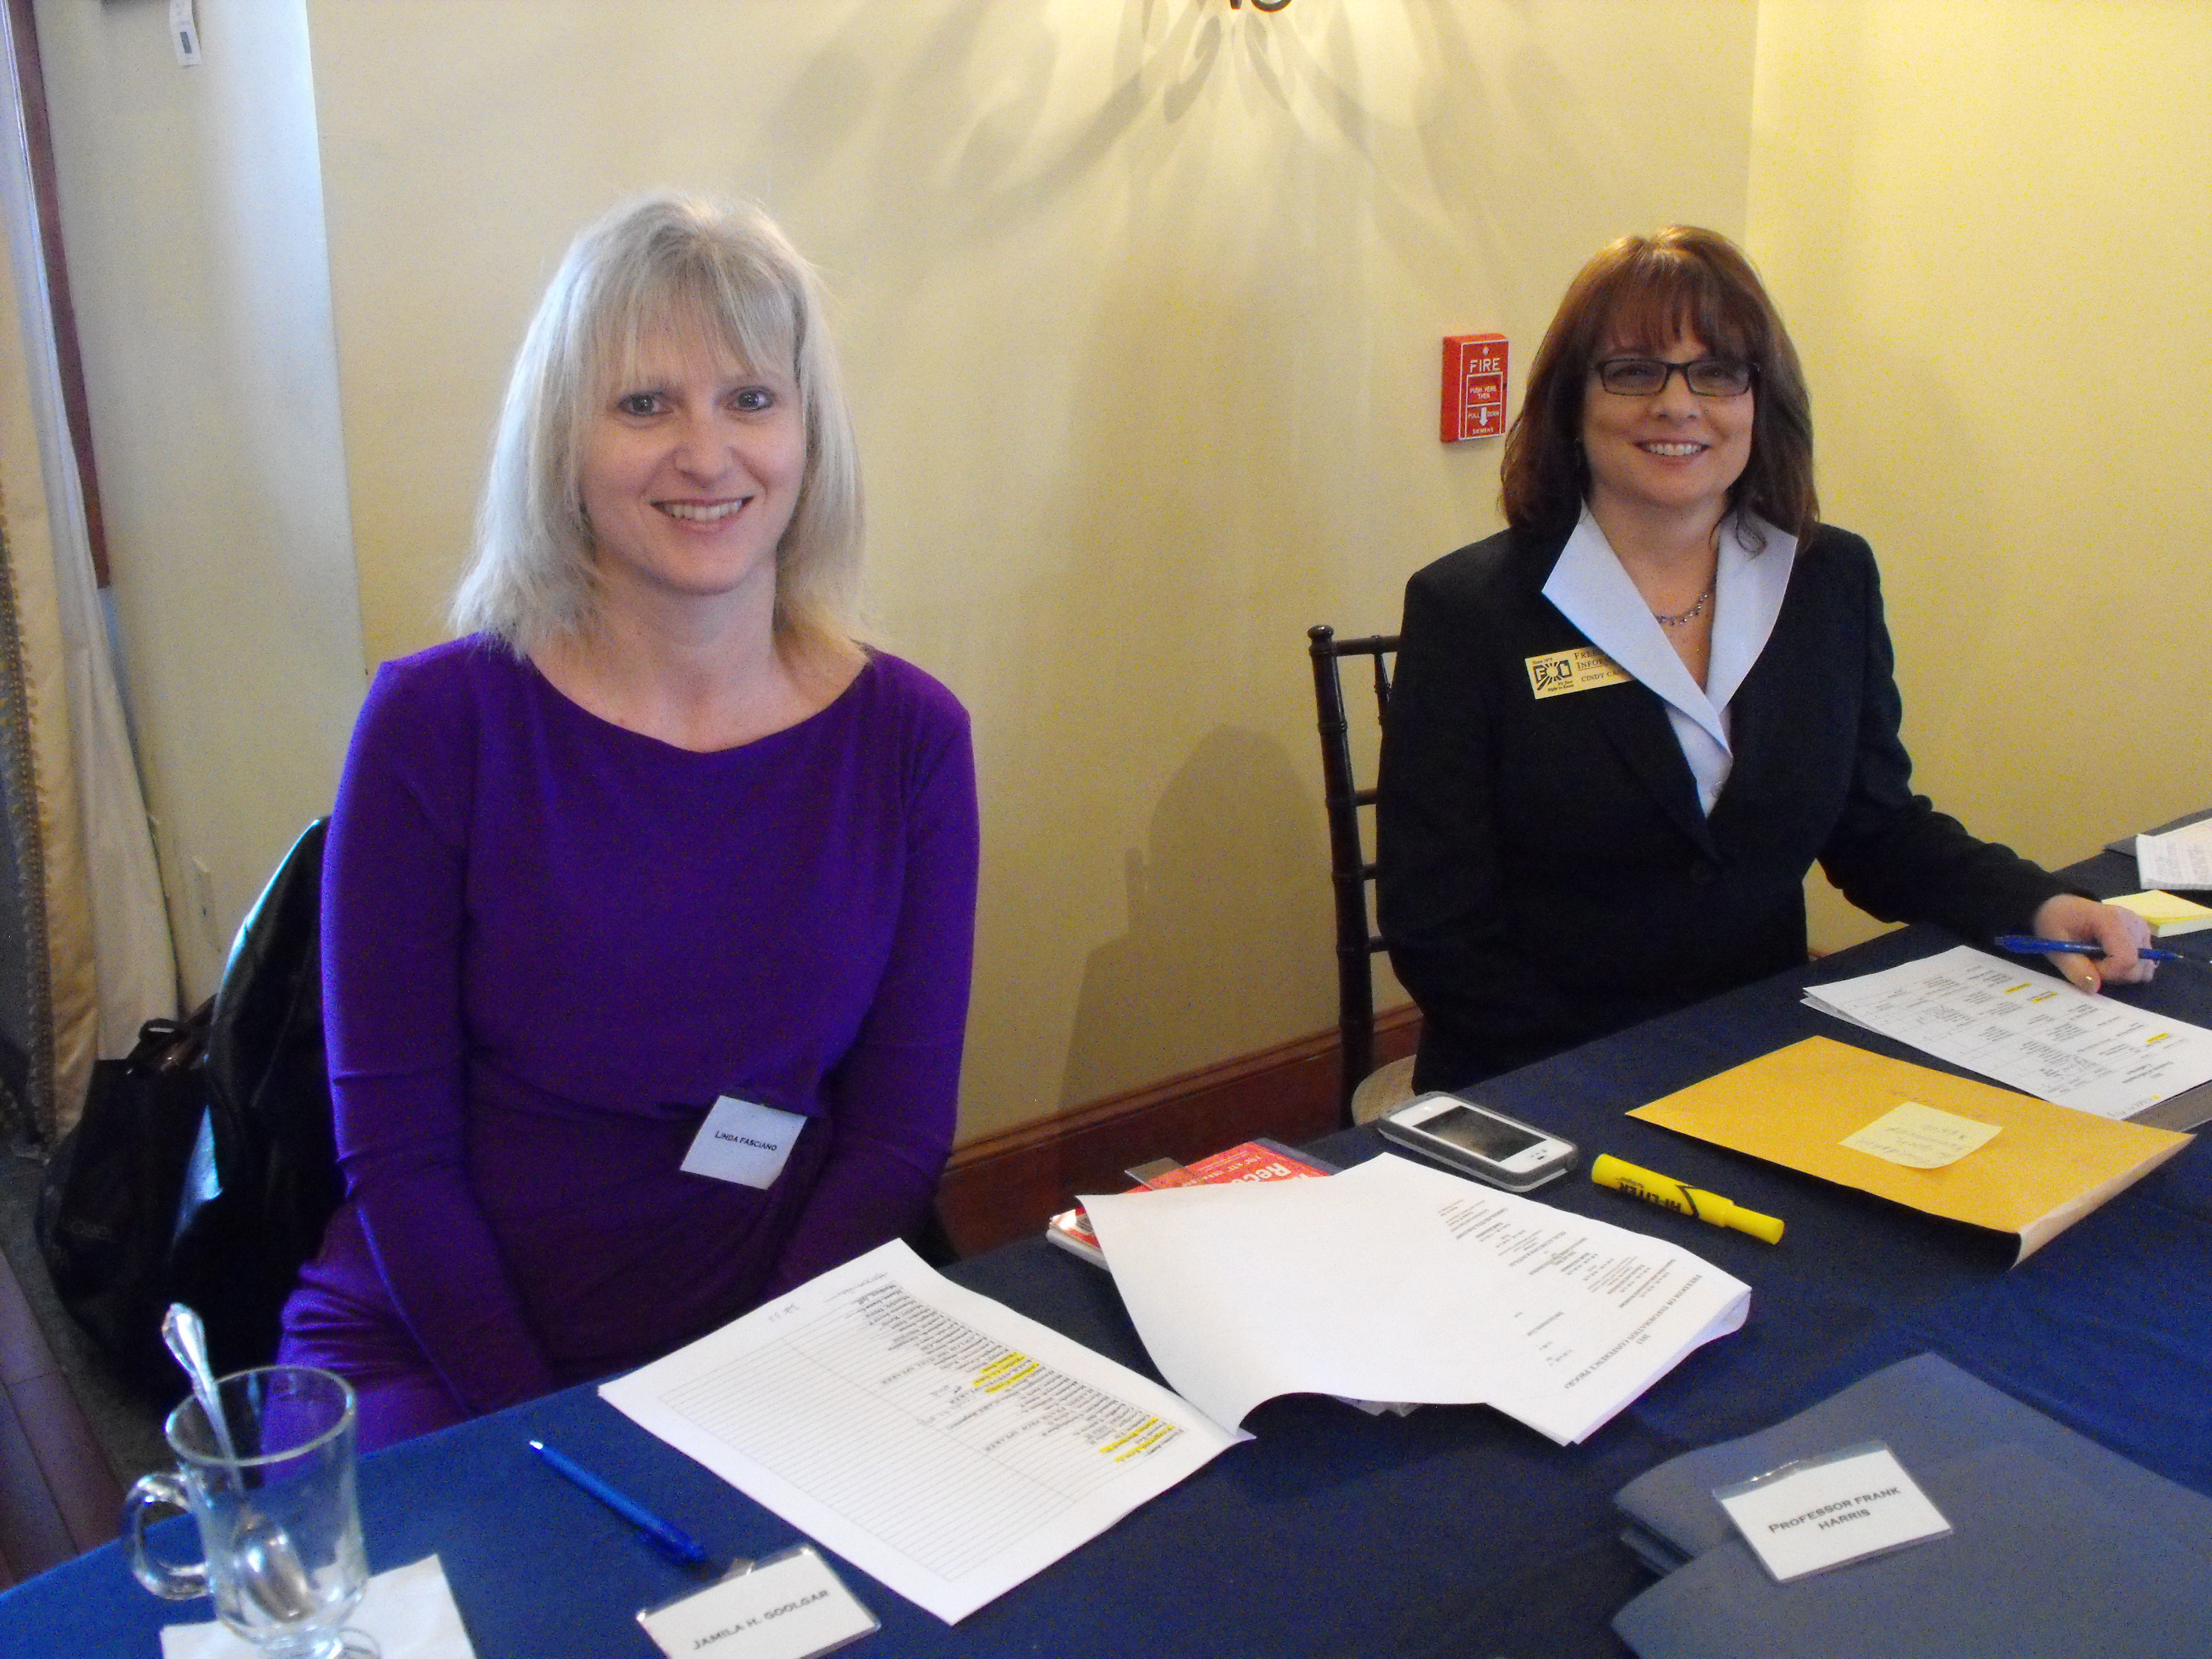 FOI Staff members Linda Fasciano (left) and Cindy Cannata (right) welcome conference attendees to the Riverhouse.